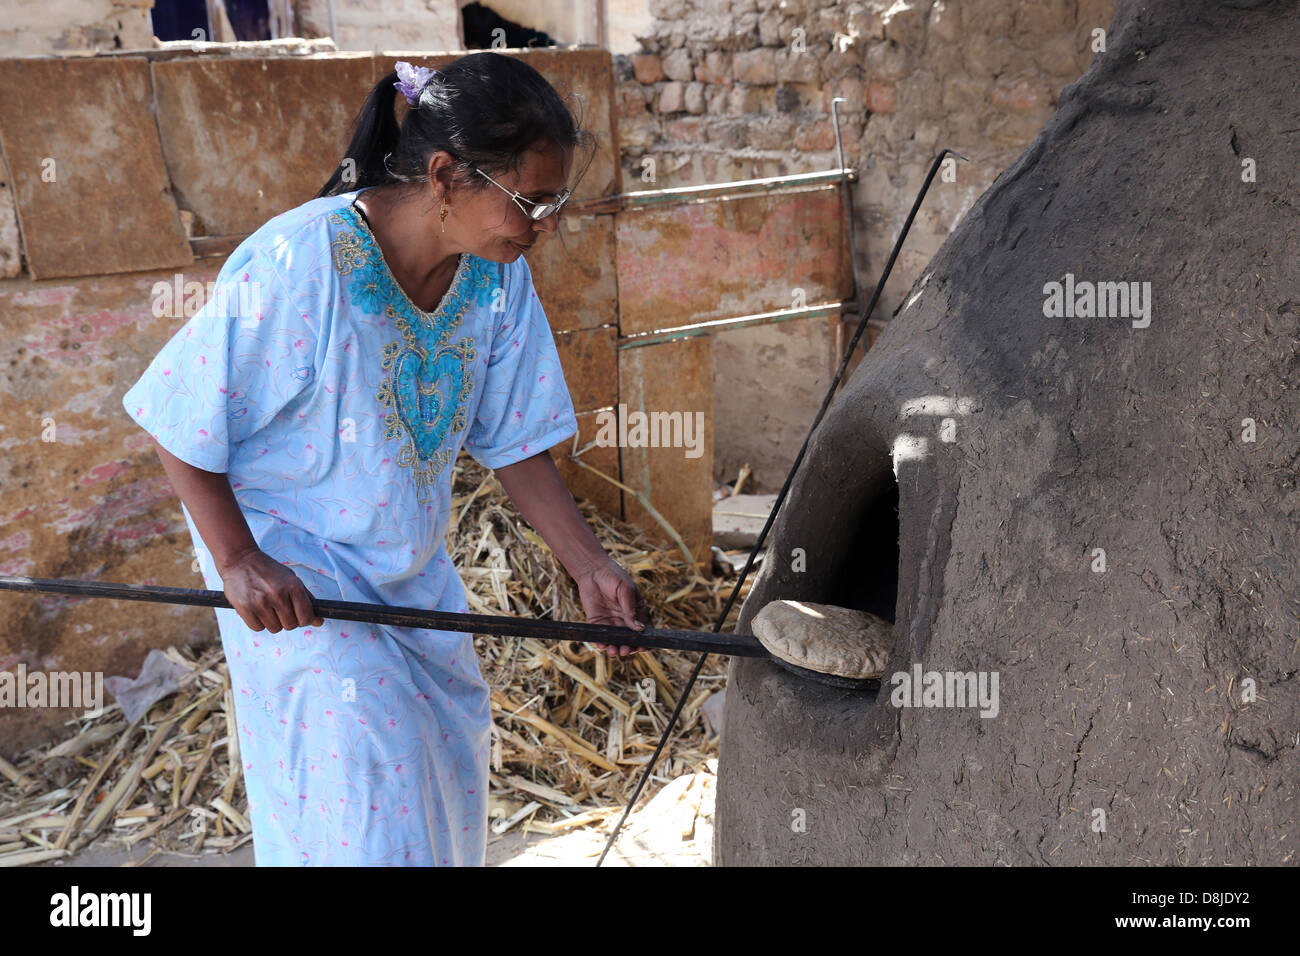 Egyptian woman making flat bread in a stone oven, Upper Egypt Stock Photo